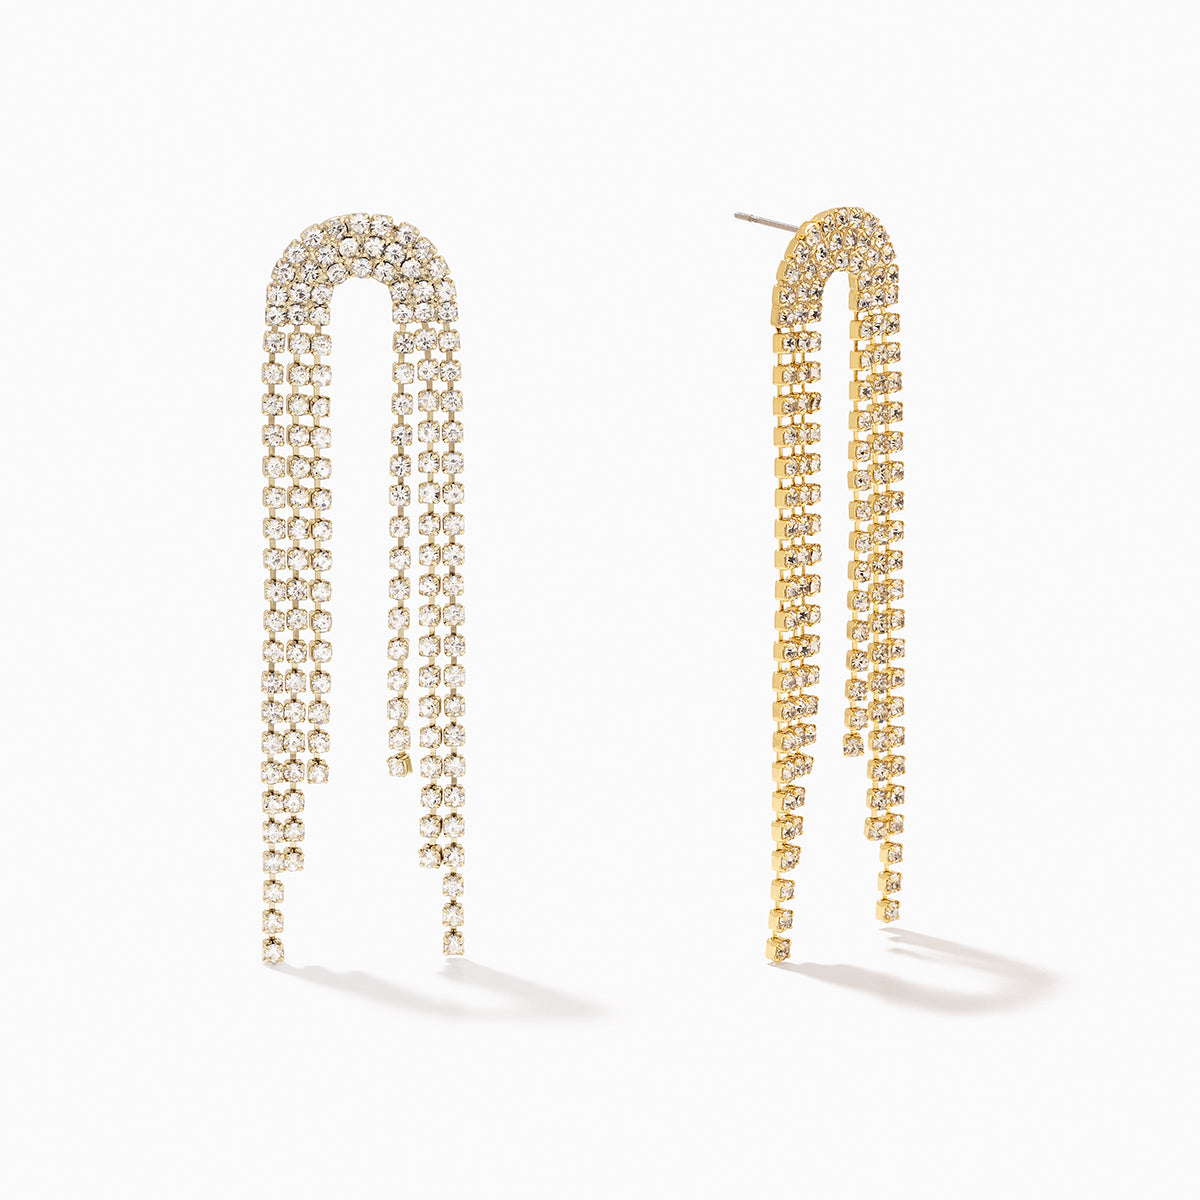 Life of the Party Earrings | Gold | Product Image | Uncommon James